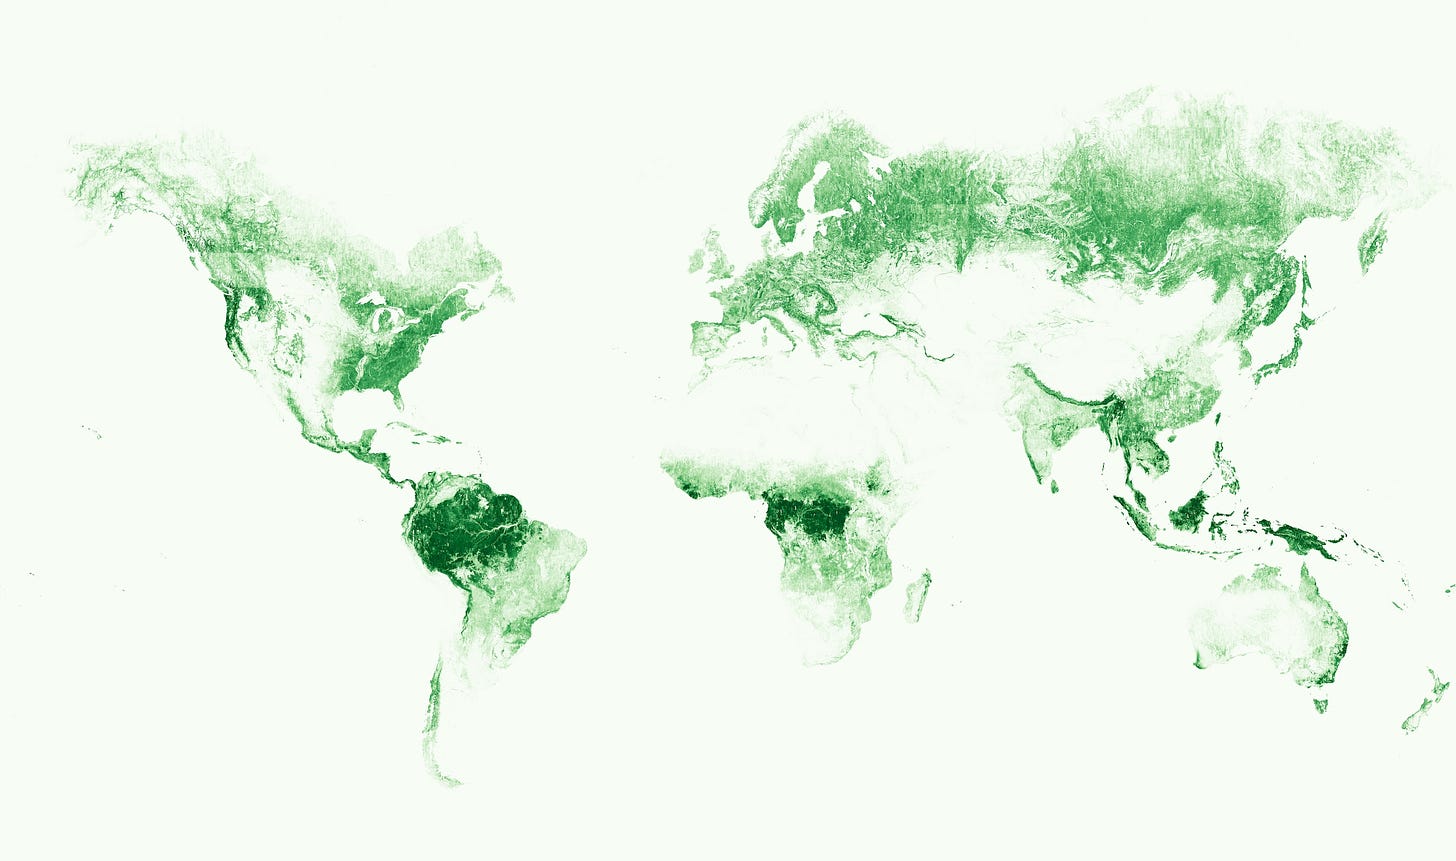 A map of the world’s canopy height obtained from AI models analyzing high resolution satellite imagery.